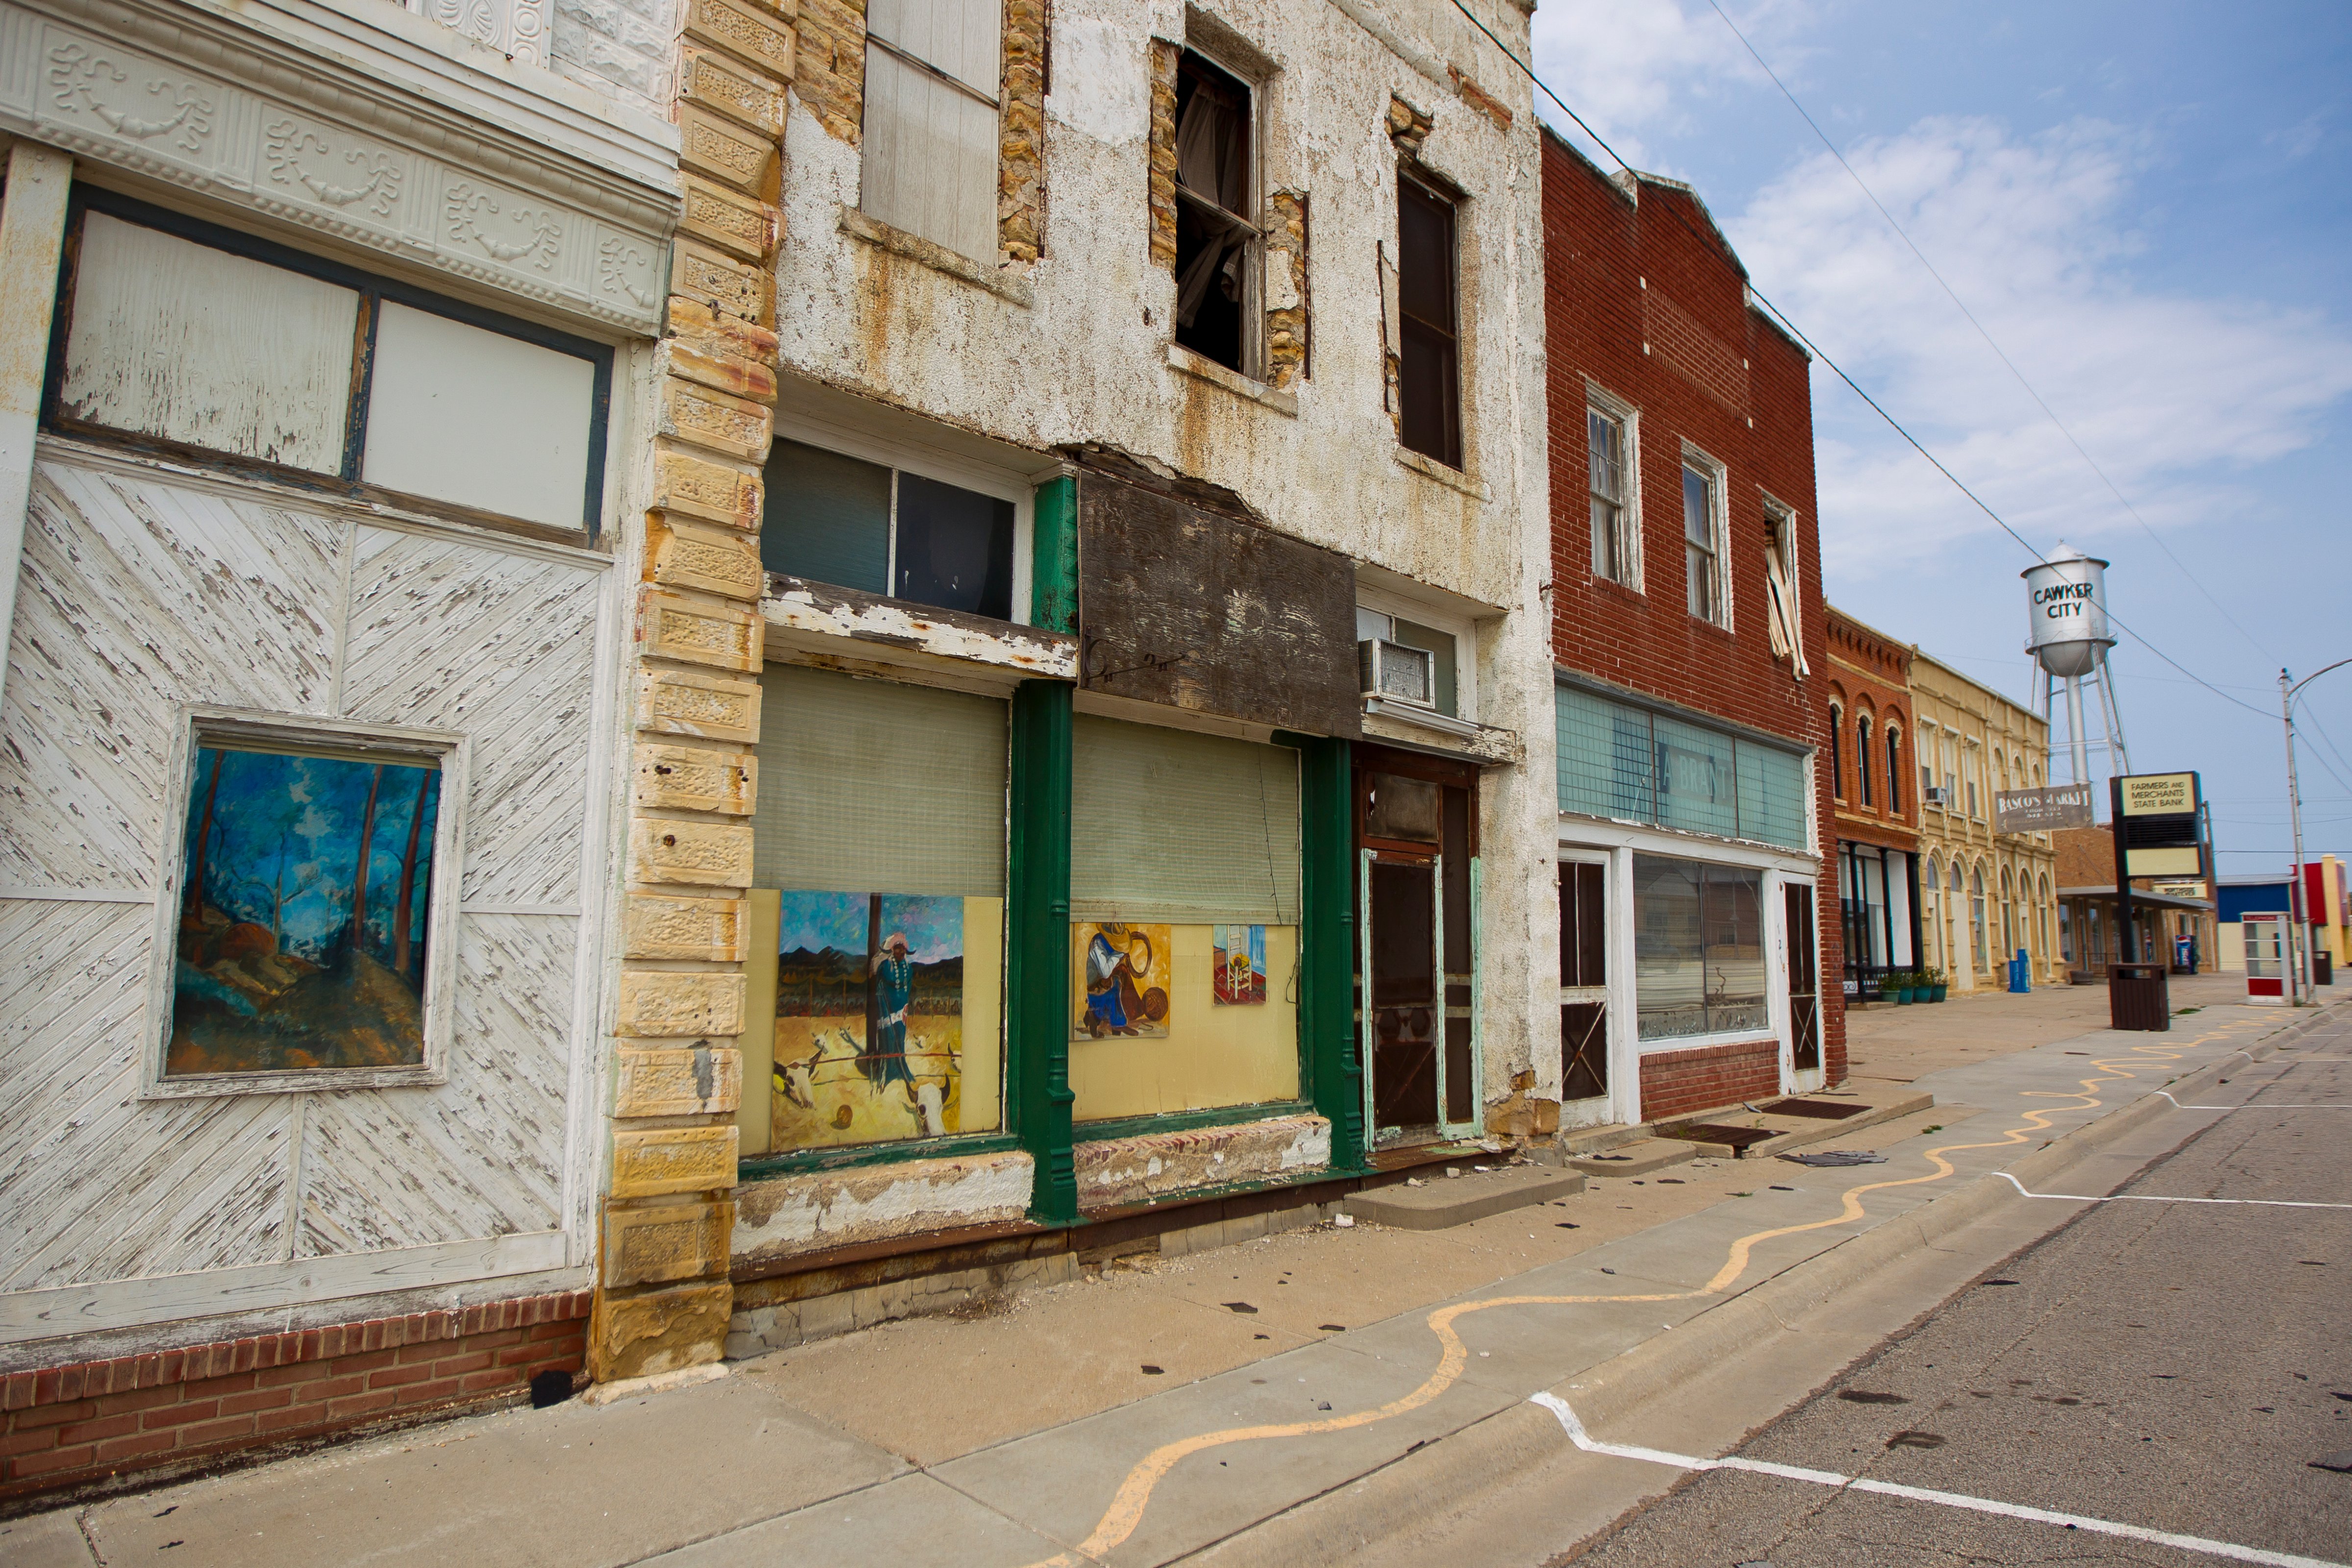 Empty buildings and streets in downtown Cawker City, Kansas. (Mike Theiss—National Geographic/Getty Images)